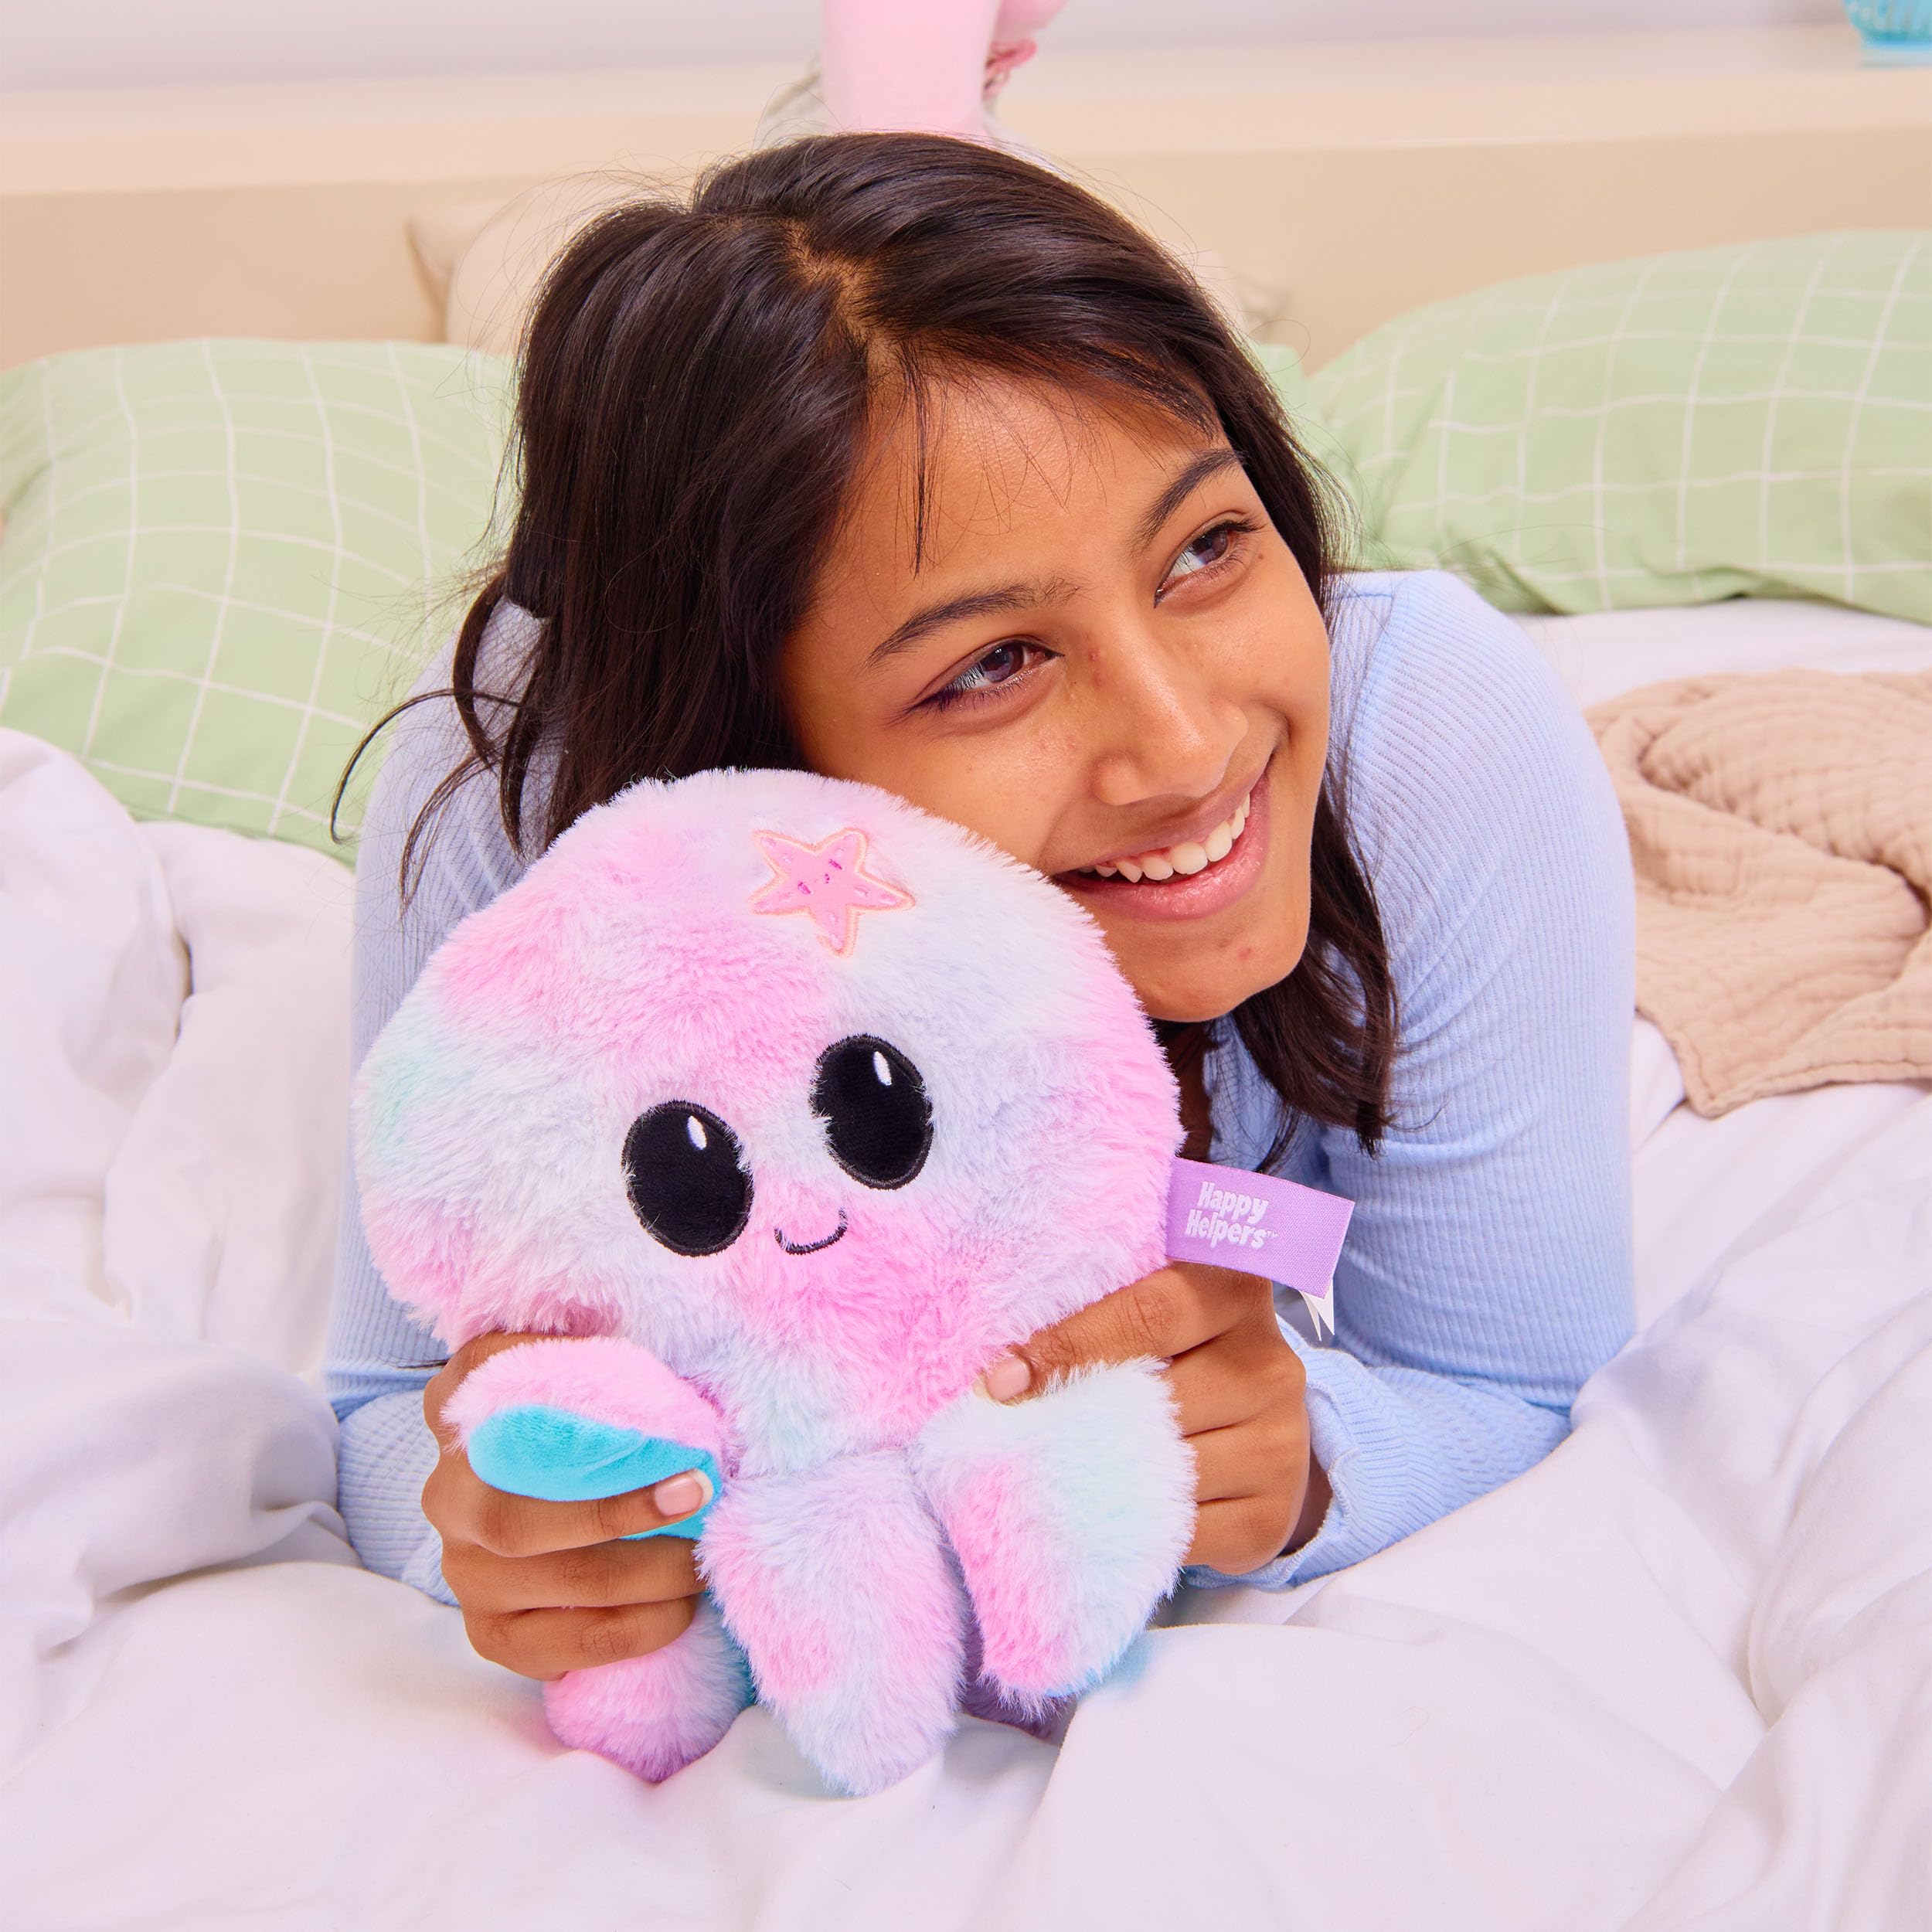 WHAT DO YOU MEME? Happy Helpers Octopus Plush — Menstruation Crustacean Plushies Cute Heating Pad for Cramps